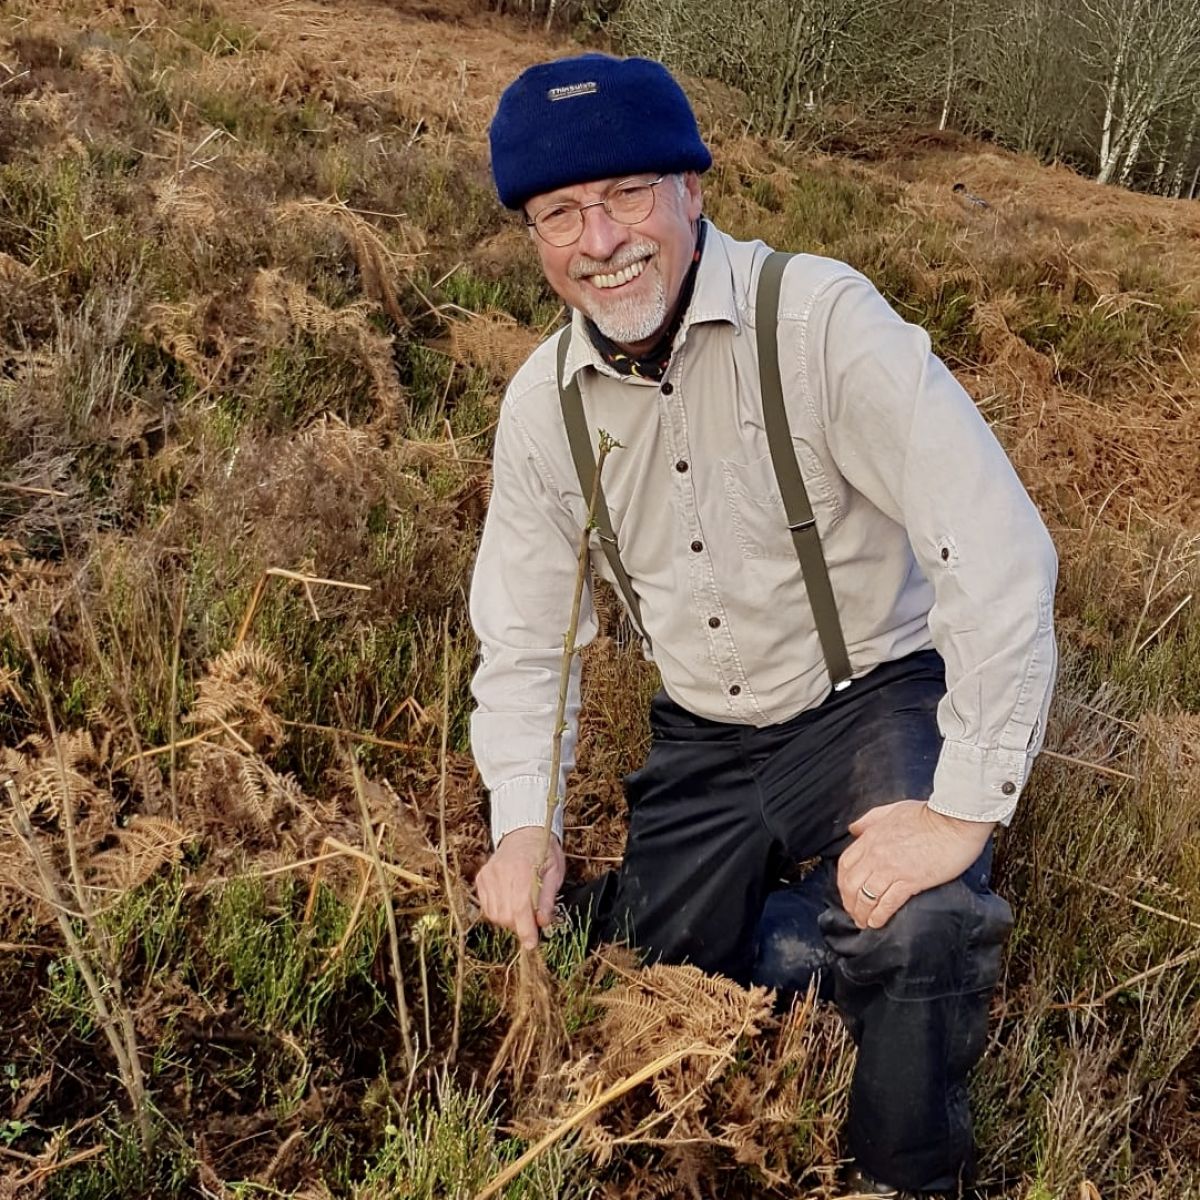 Carbon Offset Tree Planting - Peter a Rotarian and Eastern Moors Volunteer planting Hawthorn